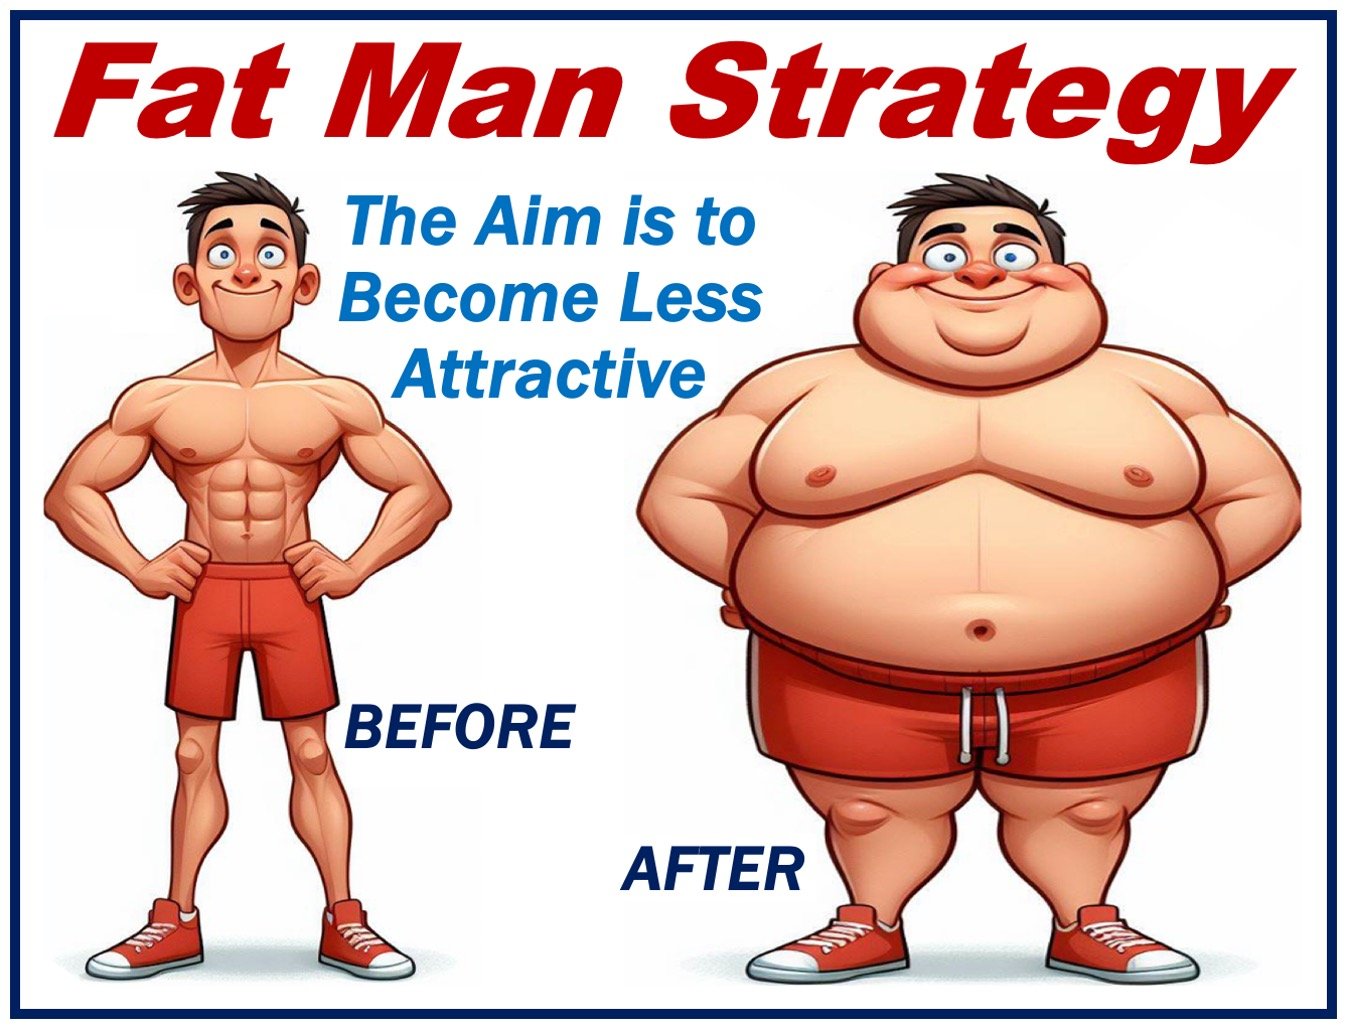 Slim and fit man next to same man who is fat - Fat man strategy.